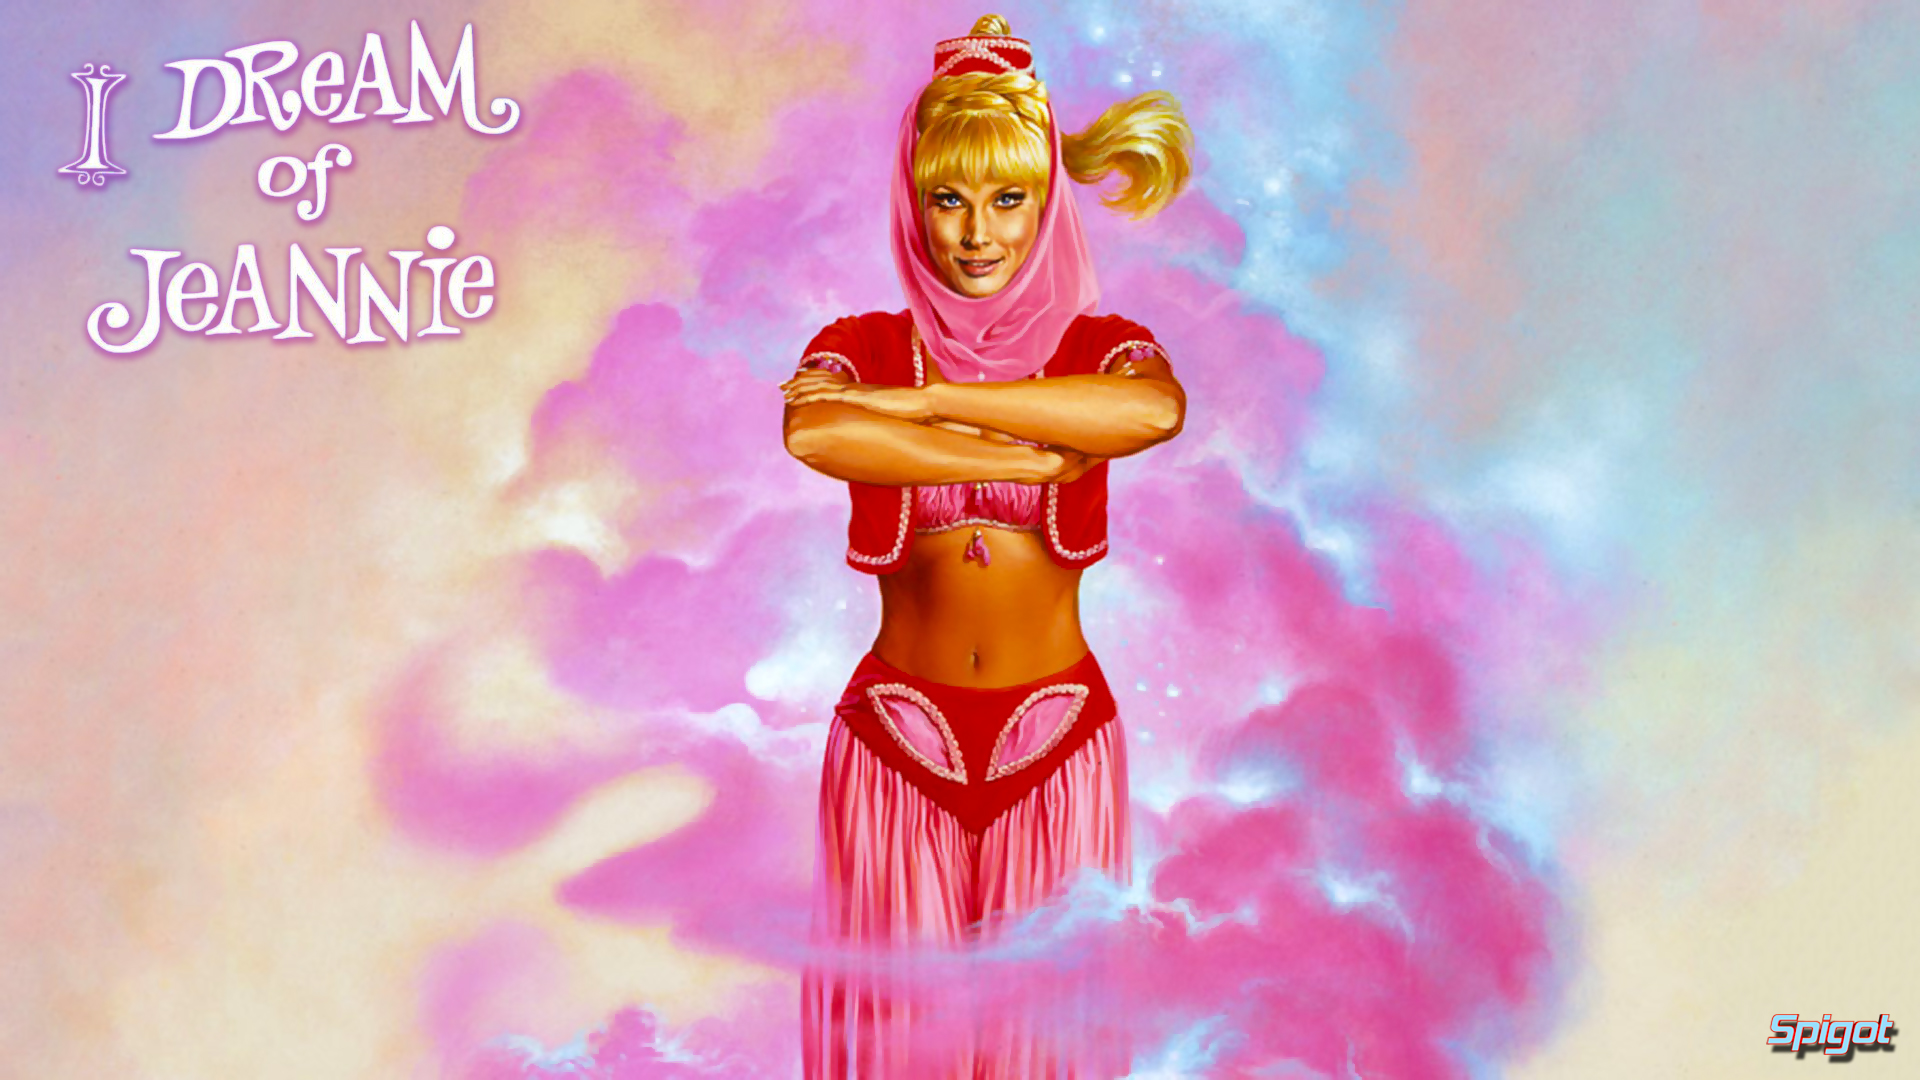 Another I Dream Of Jeannie Wallpaper George Spigot S